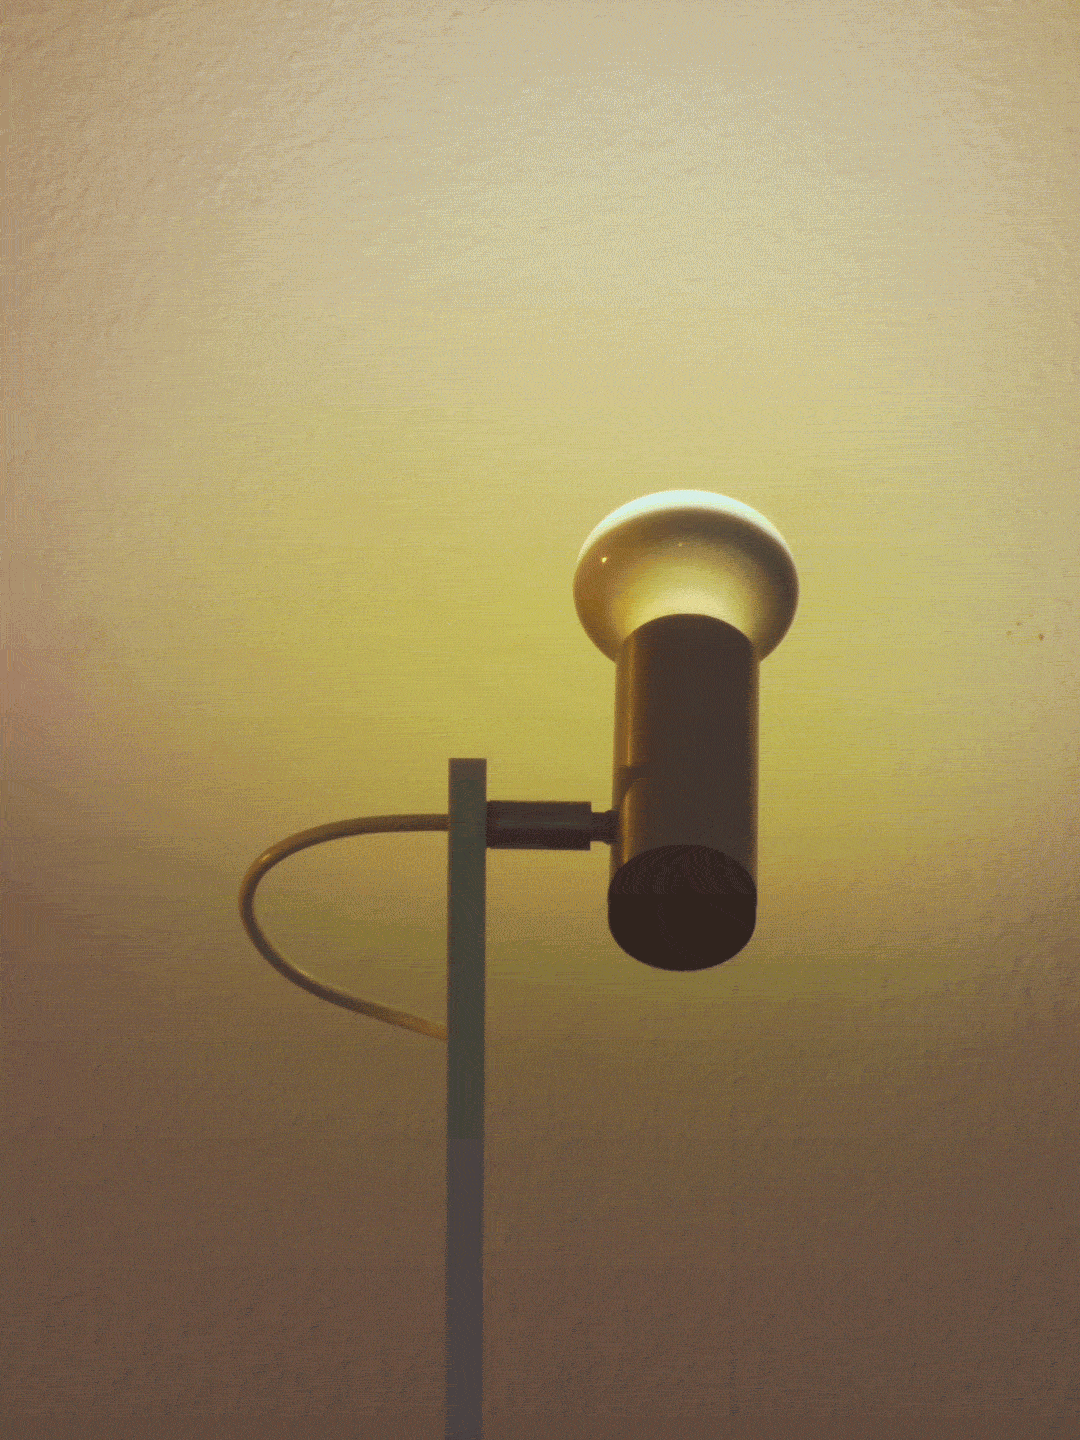 A simple metal lamp switching off and on, changing height, and changing angle